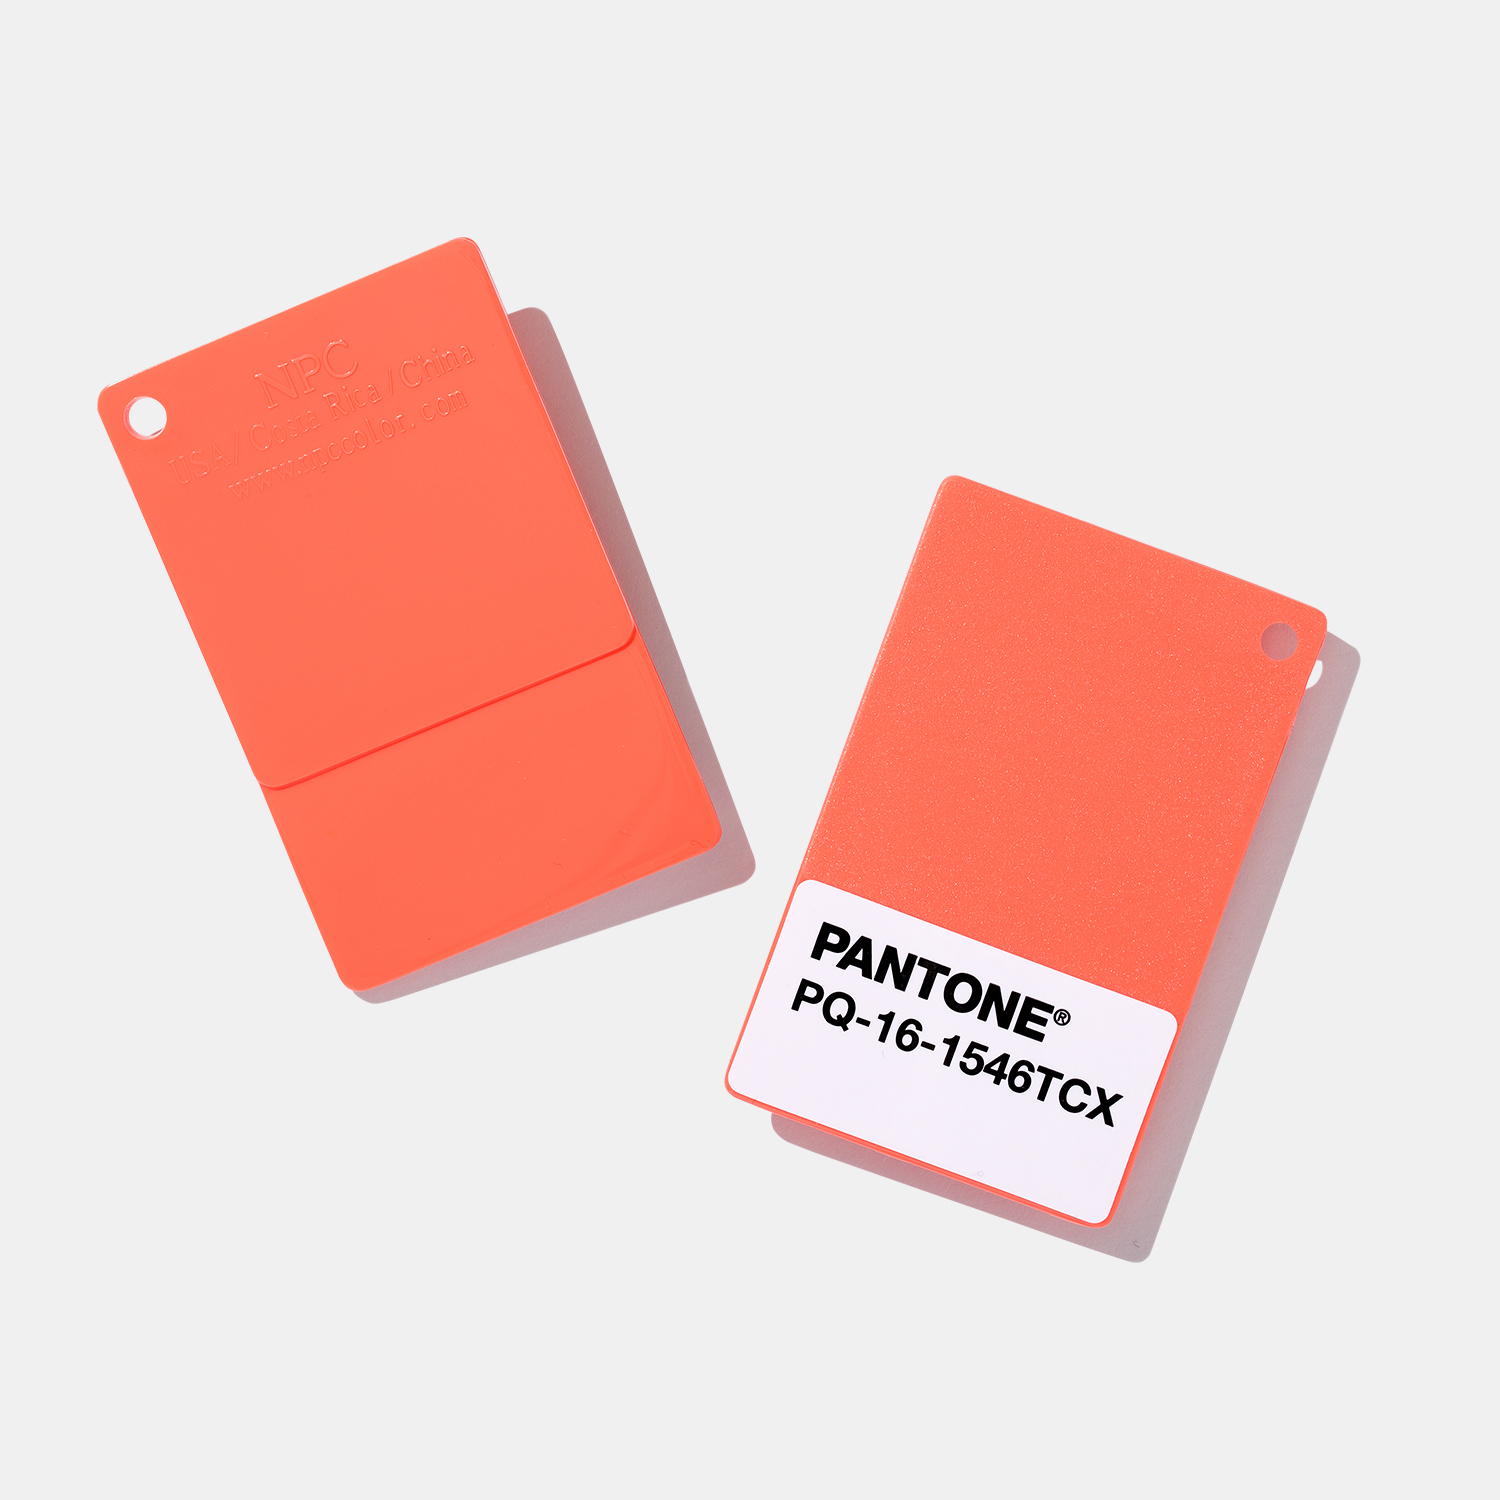 PQ-pantone-plus-pms-color-plastic-standard-chips-color-of-the-year-2019-living-coral